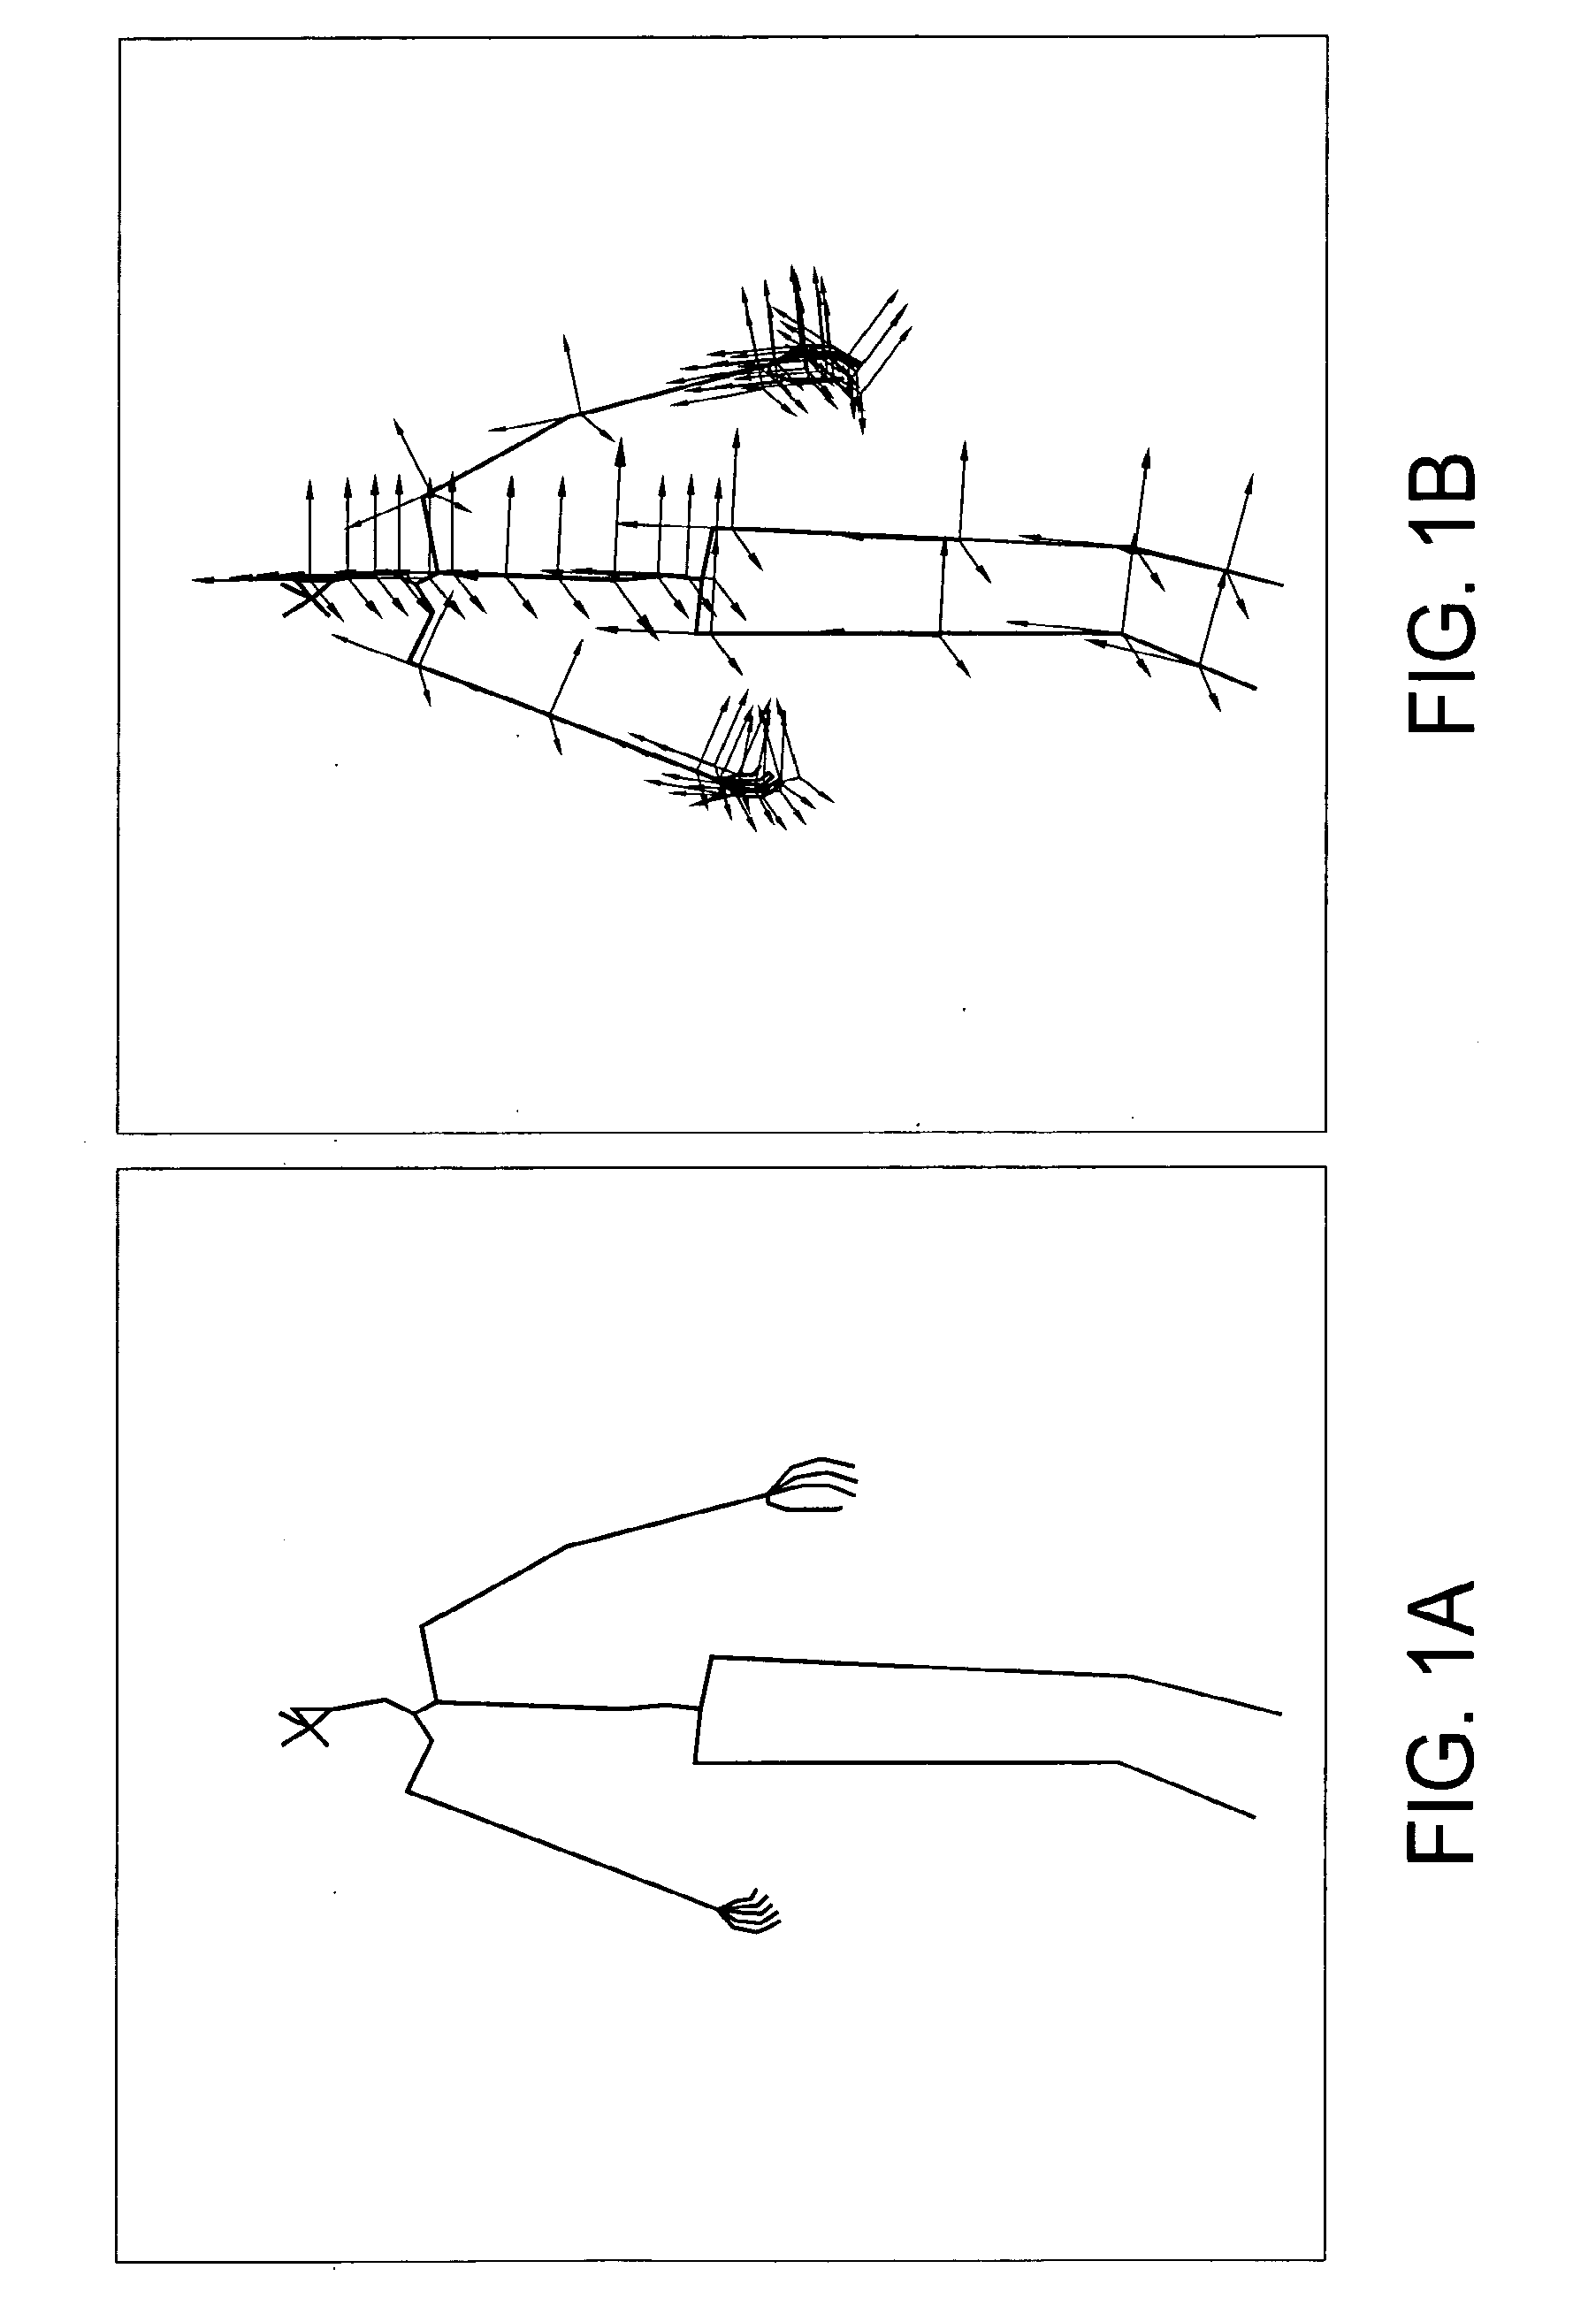 System and Method for Motion Capture